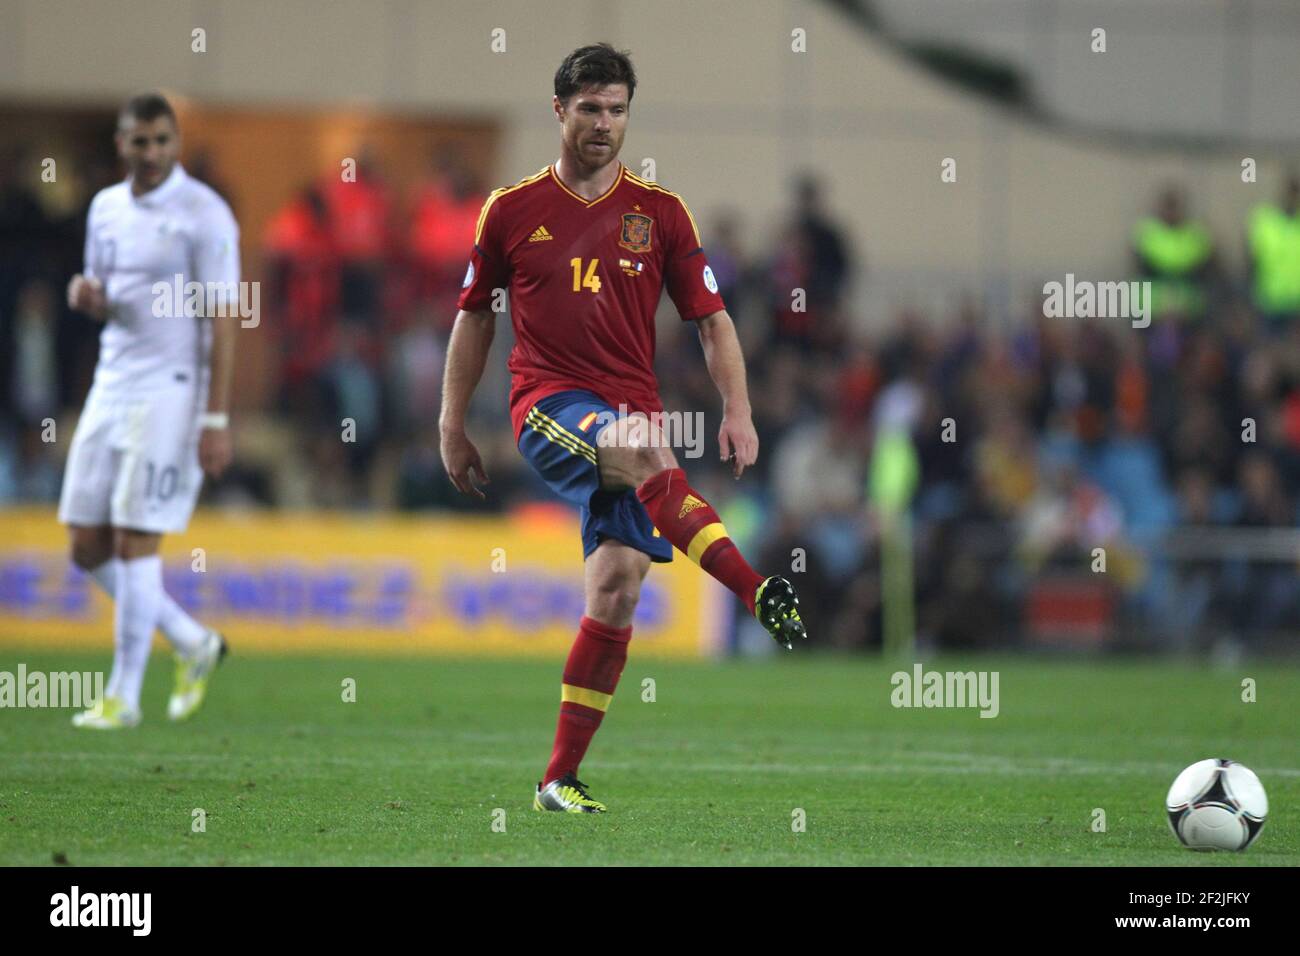 FOOTBALL - FIFA WORLD CUP 2014 - QUALIFYING - SPAIN v FRANCE - 16/10/2012 - PHOTO MANUEL BLONDEAU / AOP PRESS / DPPI - XABI ALONSO Stock Photo